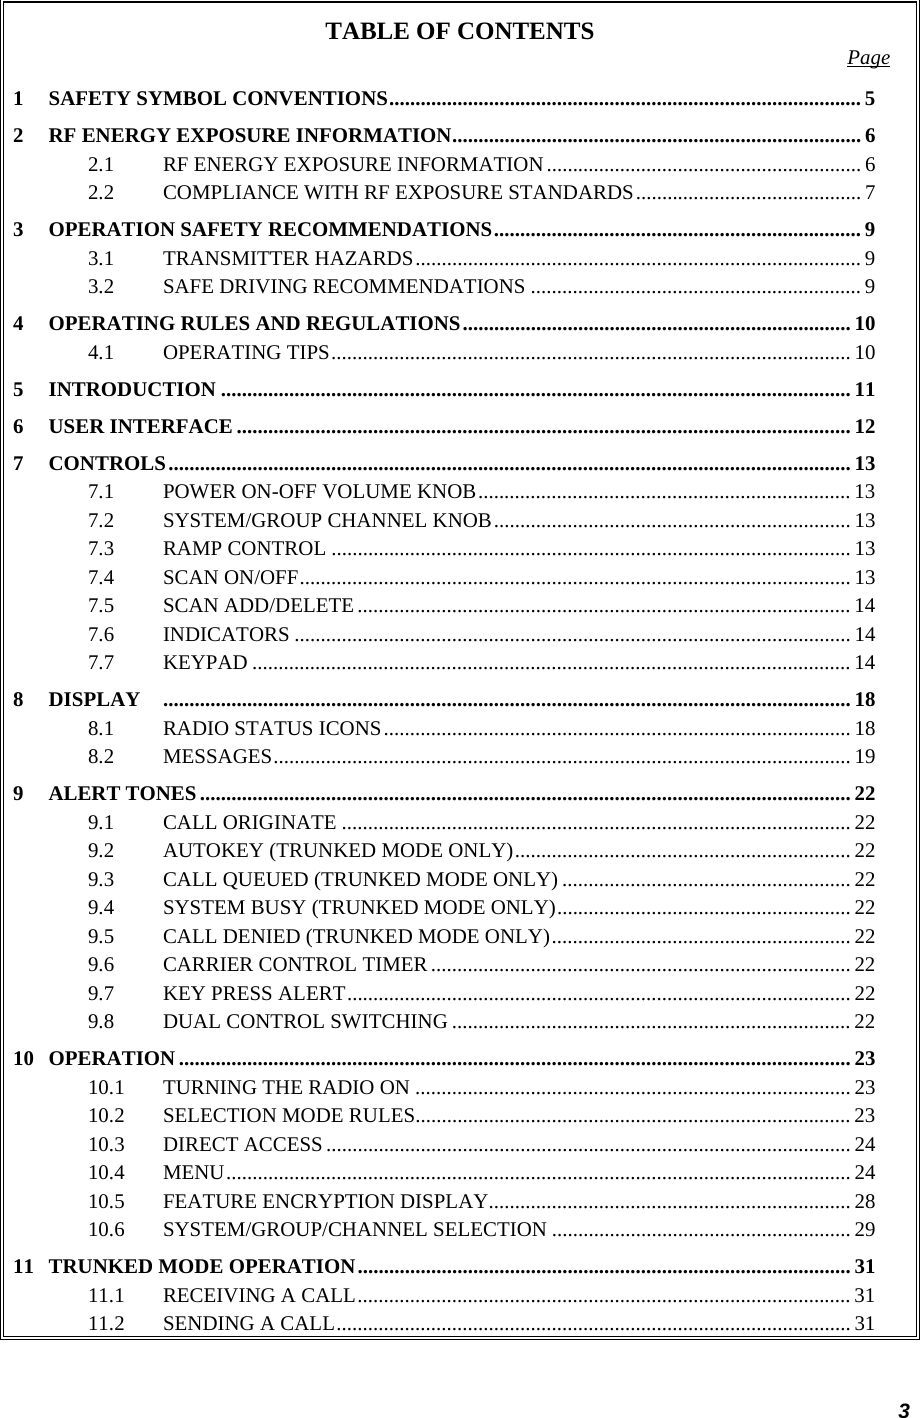 3 TABLE OF CONTENTS  Page 1 SAFETY SYMBOL CONVENTIONS.......................................................................................... 5 2 RF ENERGY EXPOSURE INFORMATION.............................................................................. 6 2.1 RF ENERGY EXPOSURE INFORMATION............................................................ 6 2.2 COMPLIANCE WITH RF EXPOSURE STANDARDS........................................... 7 3 OPERATION SAFETY RECOMMENDATIONS...................................................................... 9 3.1 TRANSMITTER HAZARDS..................................................................................... 9 3.2 SAFE DRIVING RECOMMENDATIONS ............................................................... 9 4 OPERATING RULES AND REGULATIONS.......................................................................... 10 4.1 OPERATING TIPS................................................................................................... 10 5 INTRODUCTION ........................................................................................................................ 11 6 USER INTERFACE ..................................................................................................................... 12 7 CONTROLS.................................................................................................................................. 13 7.1 POWER ON-OFF VOLUME KNOB....................................................................... 13 7.2 SYSTEM/GROUP CHANNEL KNOB.................................................................... 13 7.3 RAMP CONTROL ................................................................................................... 13 7.4 SCAN ON/OFF......................................................................................................... 13 7.5 SCAN ADD/DELETE .............................................................................................. 14 7.6 INDICATORS .......................................................................................................... 14 7.7 KEYPAD .................................................................................................................. 14 8 DISPLAY ................................................................................................................................... 18 8.1 RADIO STATUS ICONS......................................................................................... 18 8.2 MESSAGES.............................................................................................................. 19 9 ALERT TONES............................................................................................................................ 22 9.1 CALL ORIGINATE ................................................................................................. 22 9.2 AUTOKEY (TRUNKED MODE ONLY)................................................................ 22 9.3 CALL QUEUED (TRUNKED MODE ONLY) ....................................................... 22 9.4 SYSTEM BUSY (TRUNKED MODE ONLY)........................................................ 22 9.5 CALL DENIED (TRUNKED MODE ONLY)......................................................... 22 9.6 CARRIER CONTROL TIMER ................................................................................ 22 9.7 KEY PRESS ALERT................................................................................................ 22 9.8 DUAL CONTROL SWITCHING ............................................................................ 22 10 OPERATION ................................................................................................................................ 23 10.1 TURNING THE RADIO ON ................................................................................... 23 10.2 SELECTION MODE RULES................................................................................... 23 10.3 DIRECT ACCESS .................................................................................................... 24 10.4 MENU....................................................................................................................... 24 10.5 FEATURE ENCRYPTION DISPLAY..................................................................... 28 10.6 SYSTEM/GROUP/CHANNEL SELECTION ......................................................... 29 11 TRUNKED MODE OPERATION.............................................................................................. 31 11.1 RECEIVING A CALL.............................................................................................. 31 11.2 SENDING A CALL.................................................................................................. 31 